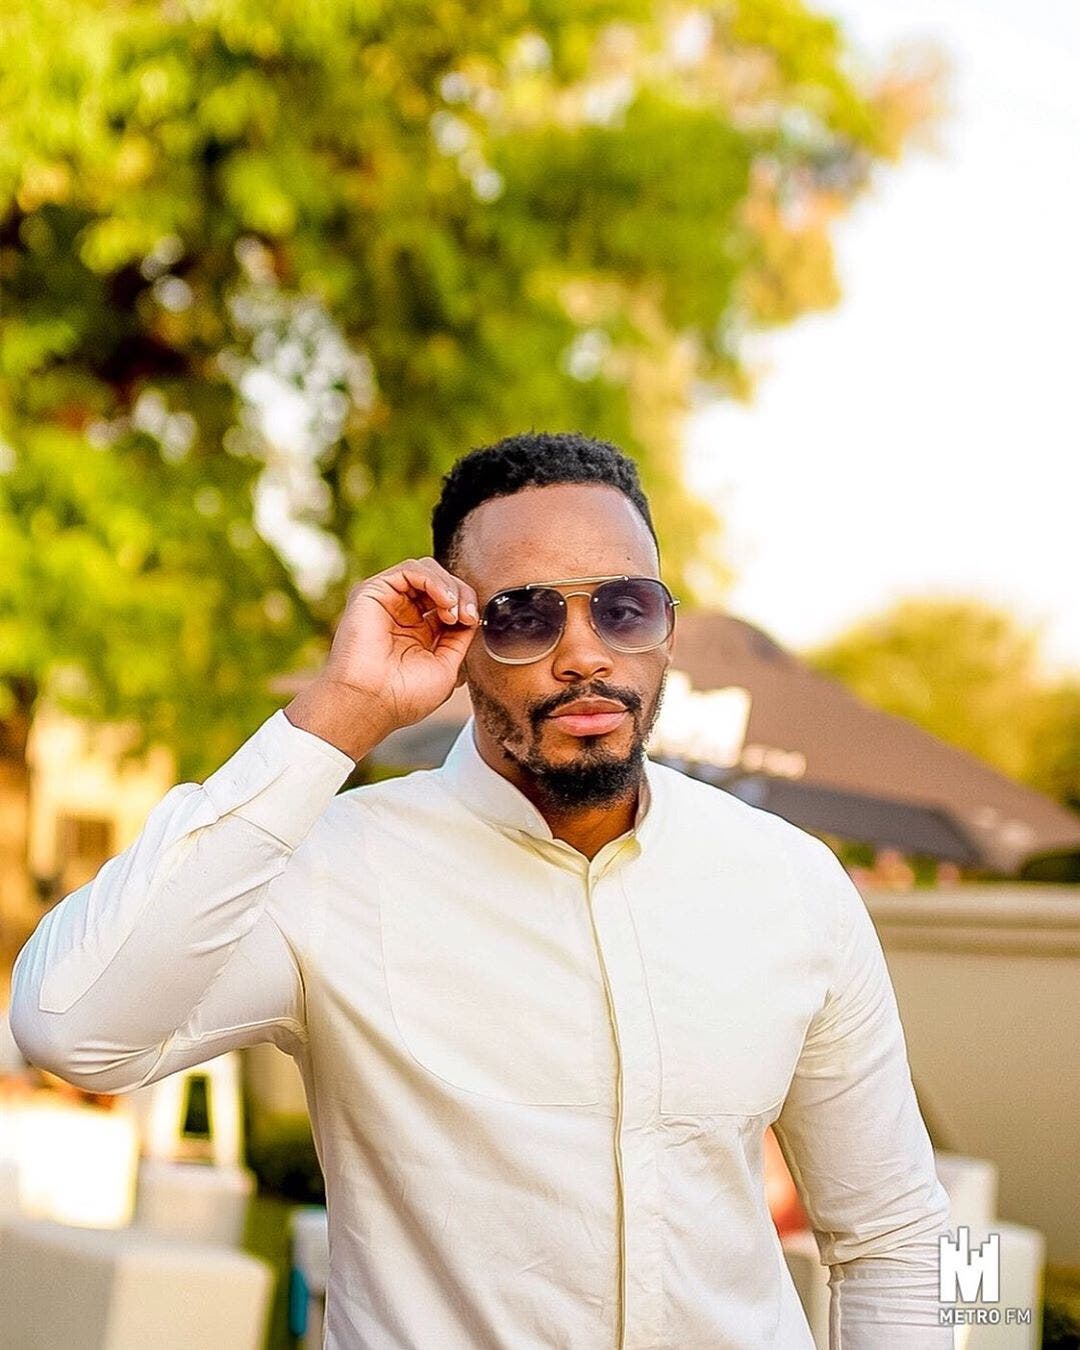 Singer Donald set to drop an amapiano- inspired album